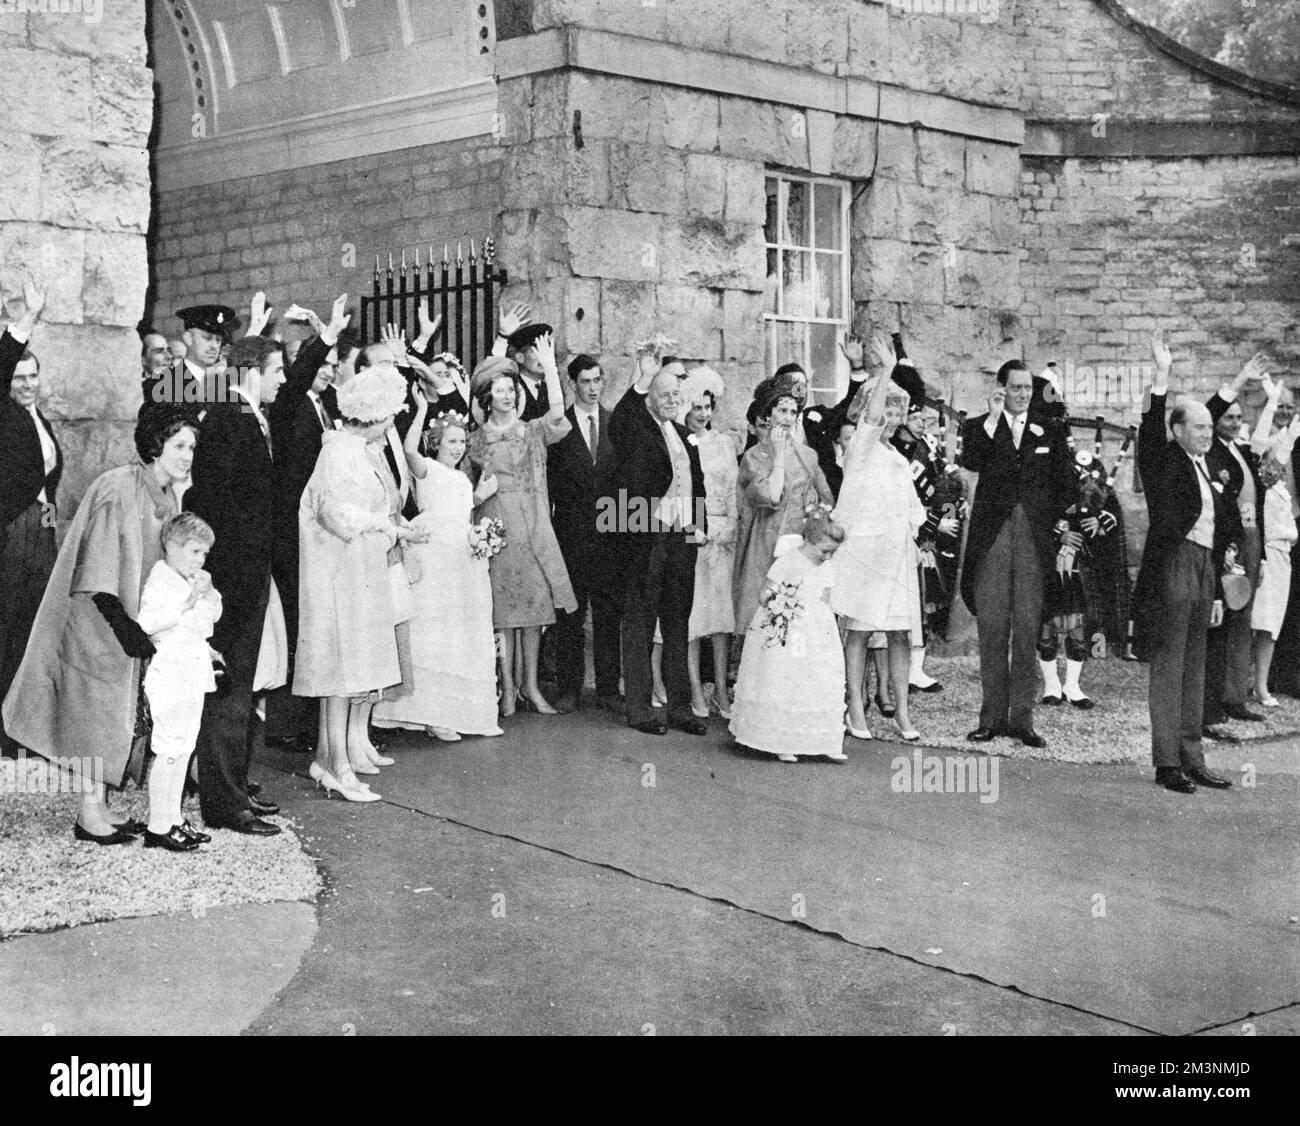 Wedding guests wave farewell to the departing newly married Duke and Duchess of Kent (formerly Miss Katherine Worsley) as they leave Hovingham Hall, the bride's family home for their honeymoon following their wedding at York Minster on 8 June 1961.  In the centre of picture can be seen the groom's sister, Princess Alexandra of Kent and Princess Anne (Princess Royal) who was one of the couple's bridesmaids.     Date: 1961 Stock Photo